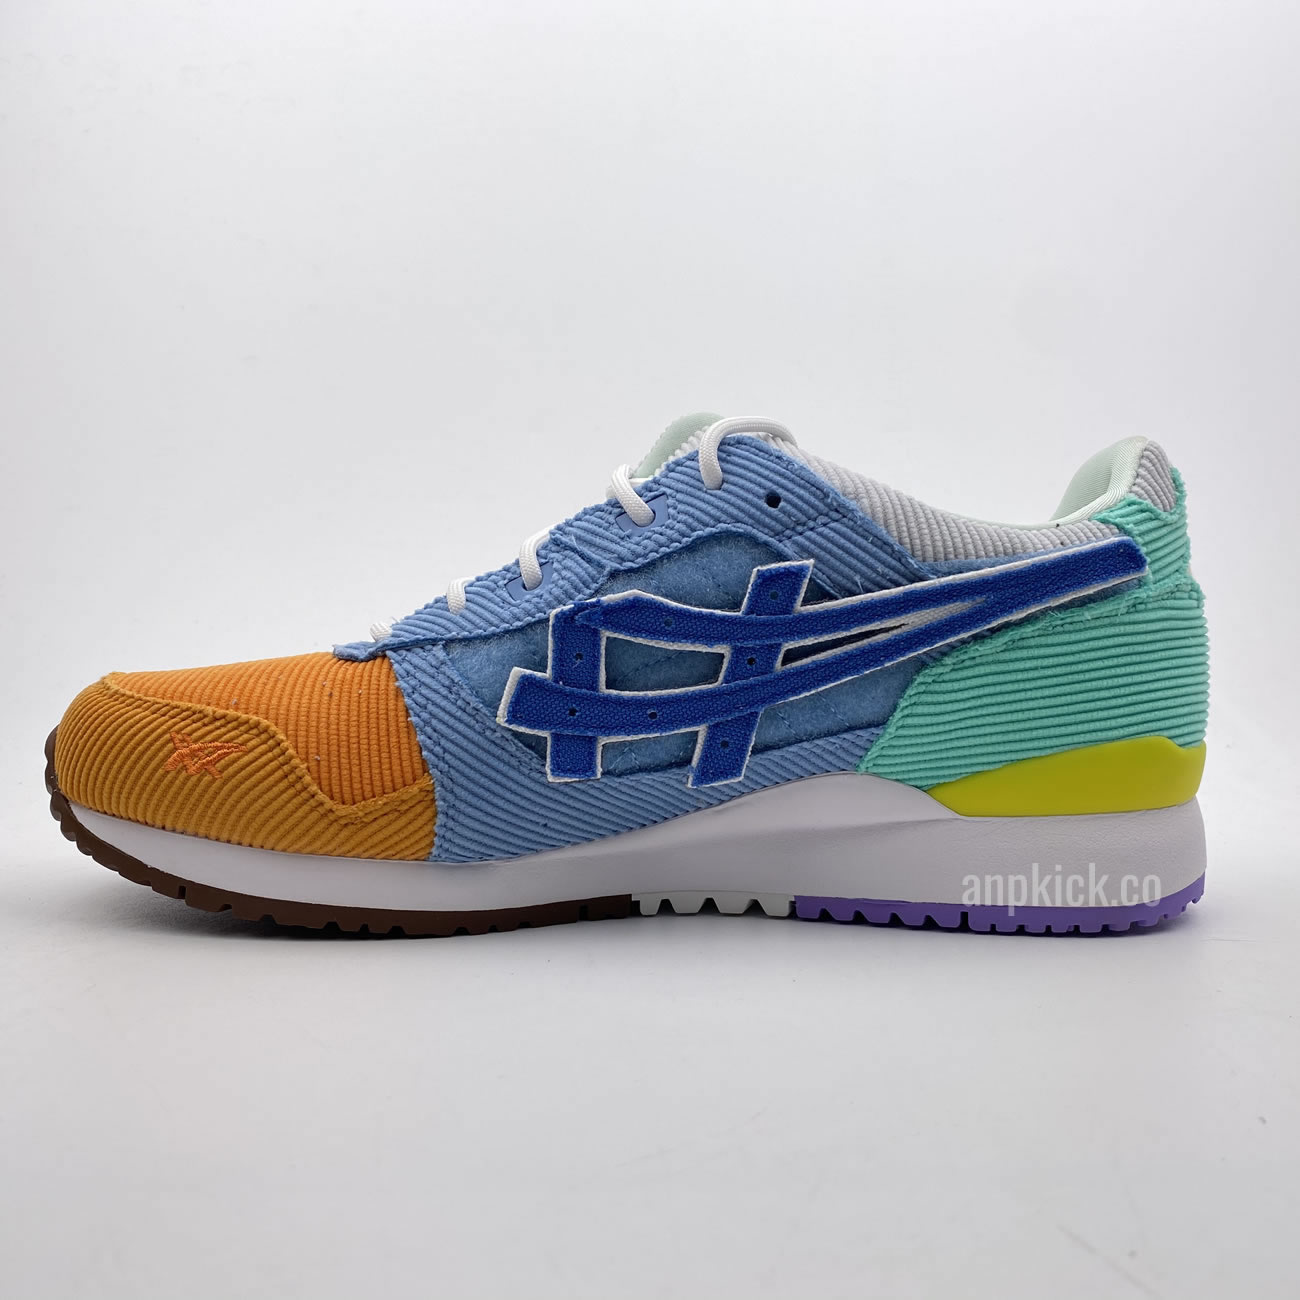 Sean Wotherspoon Atmos Asics Gel Lyte Og Shoes Multi 1203a019 000 (3) - newkick.org